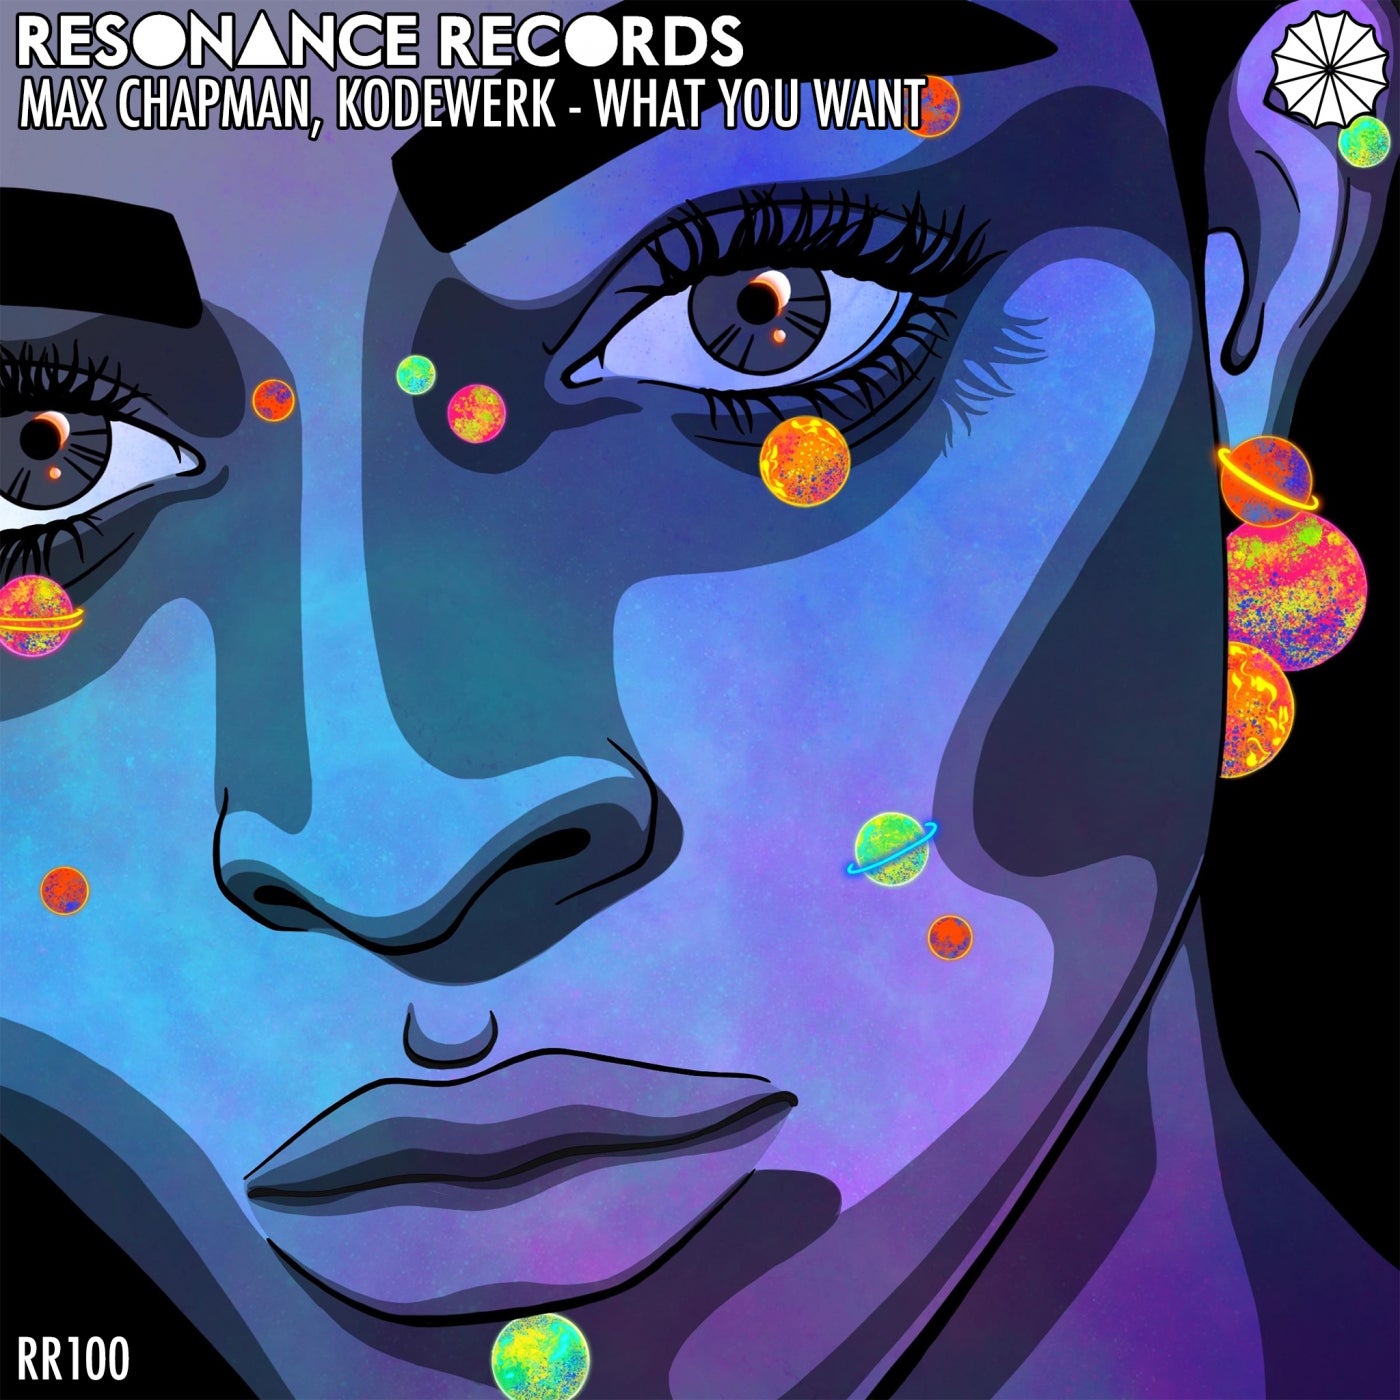 image cover: Max Chapman, Kodewerk - What You Want / RR100